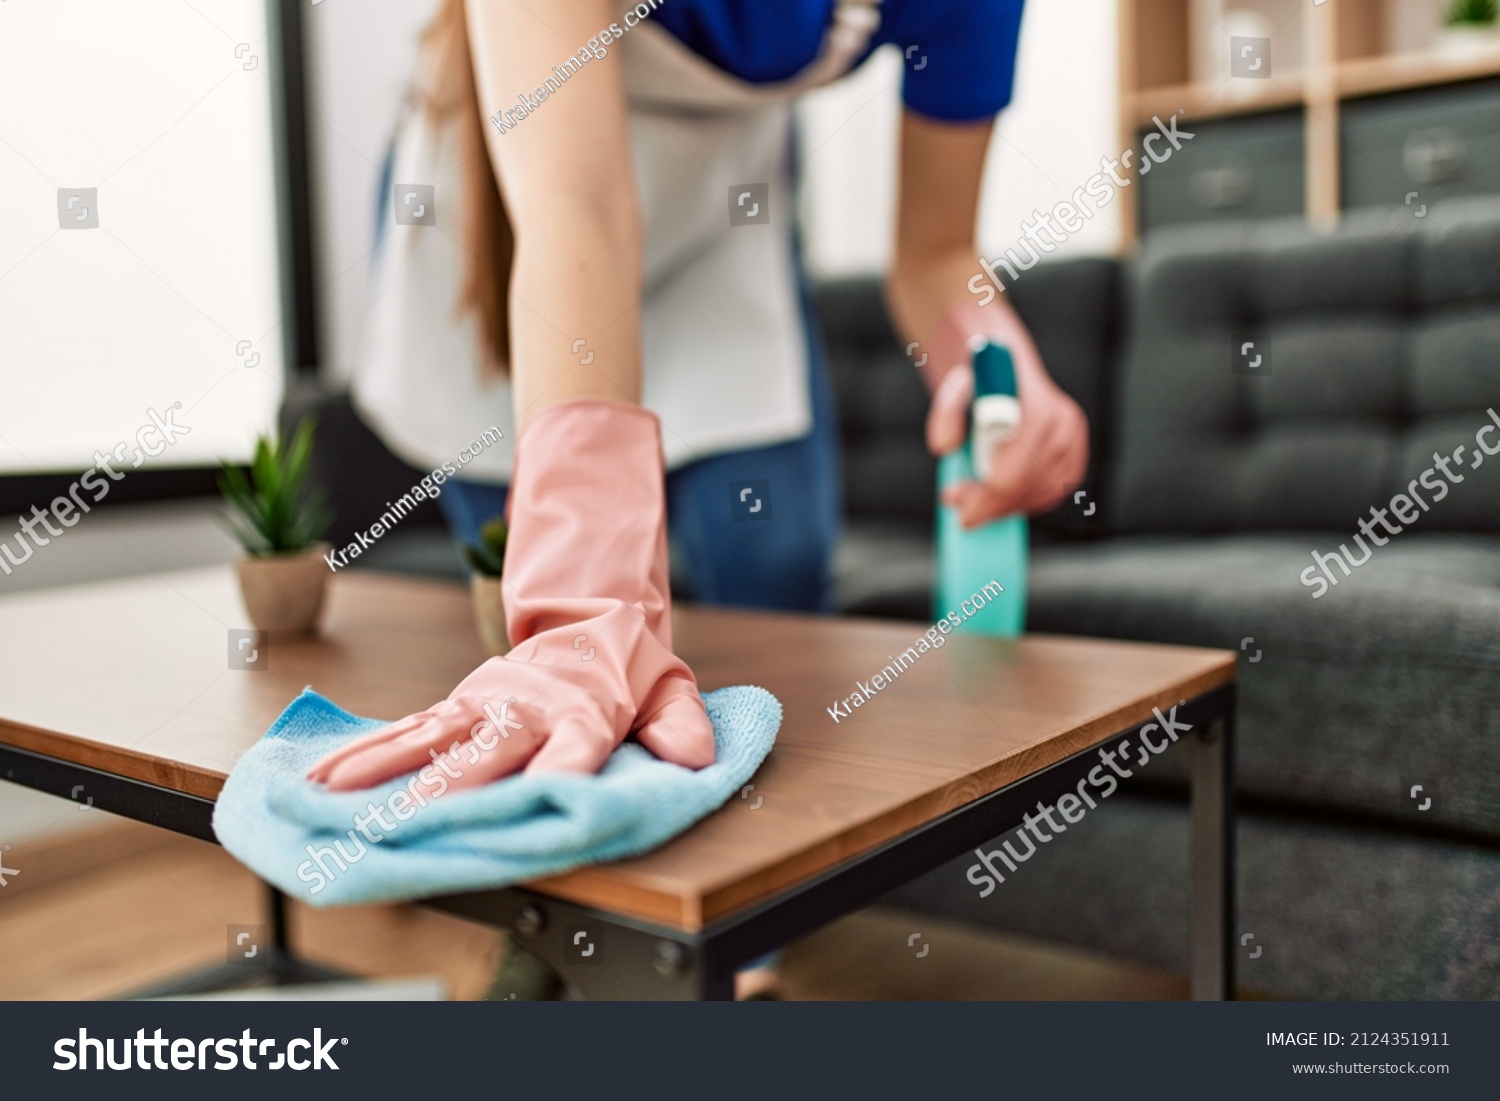 Woman cleaning table using rag and diffuser at home. #2124351911